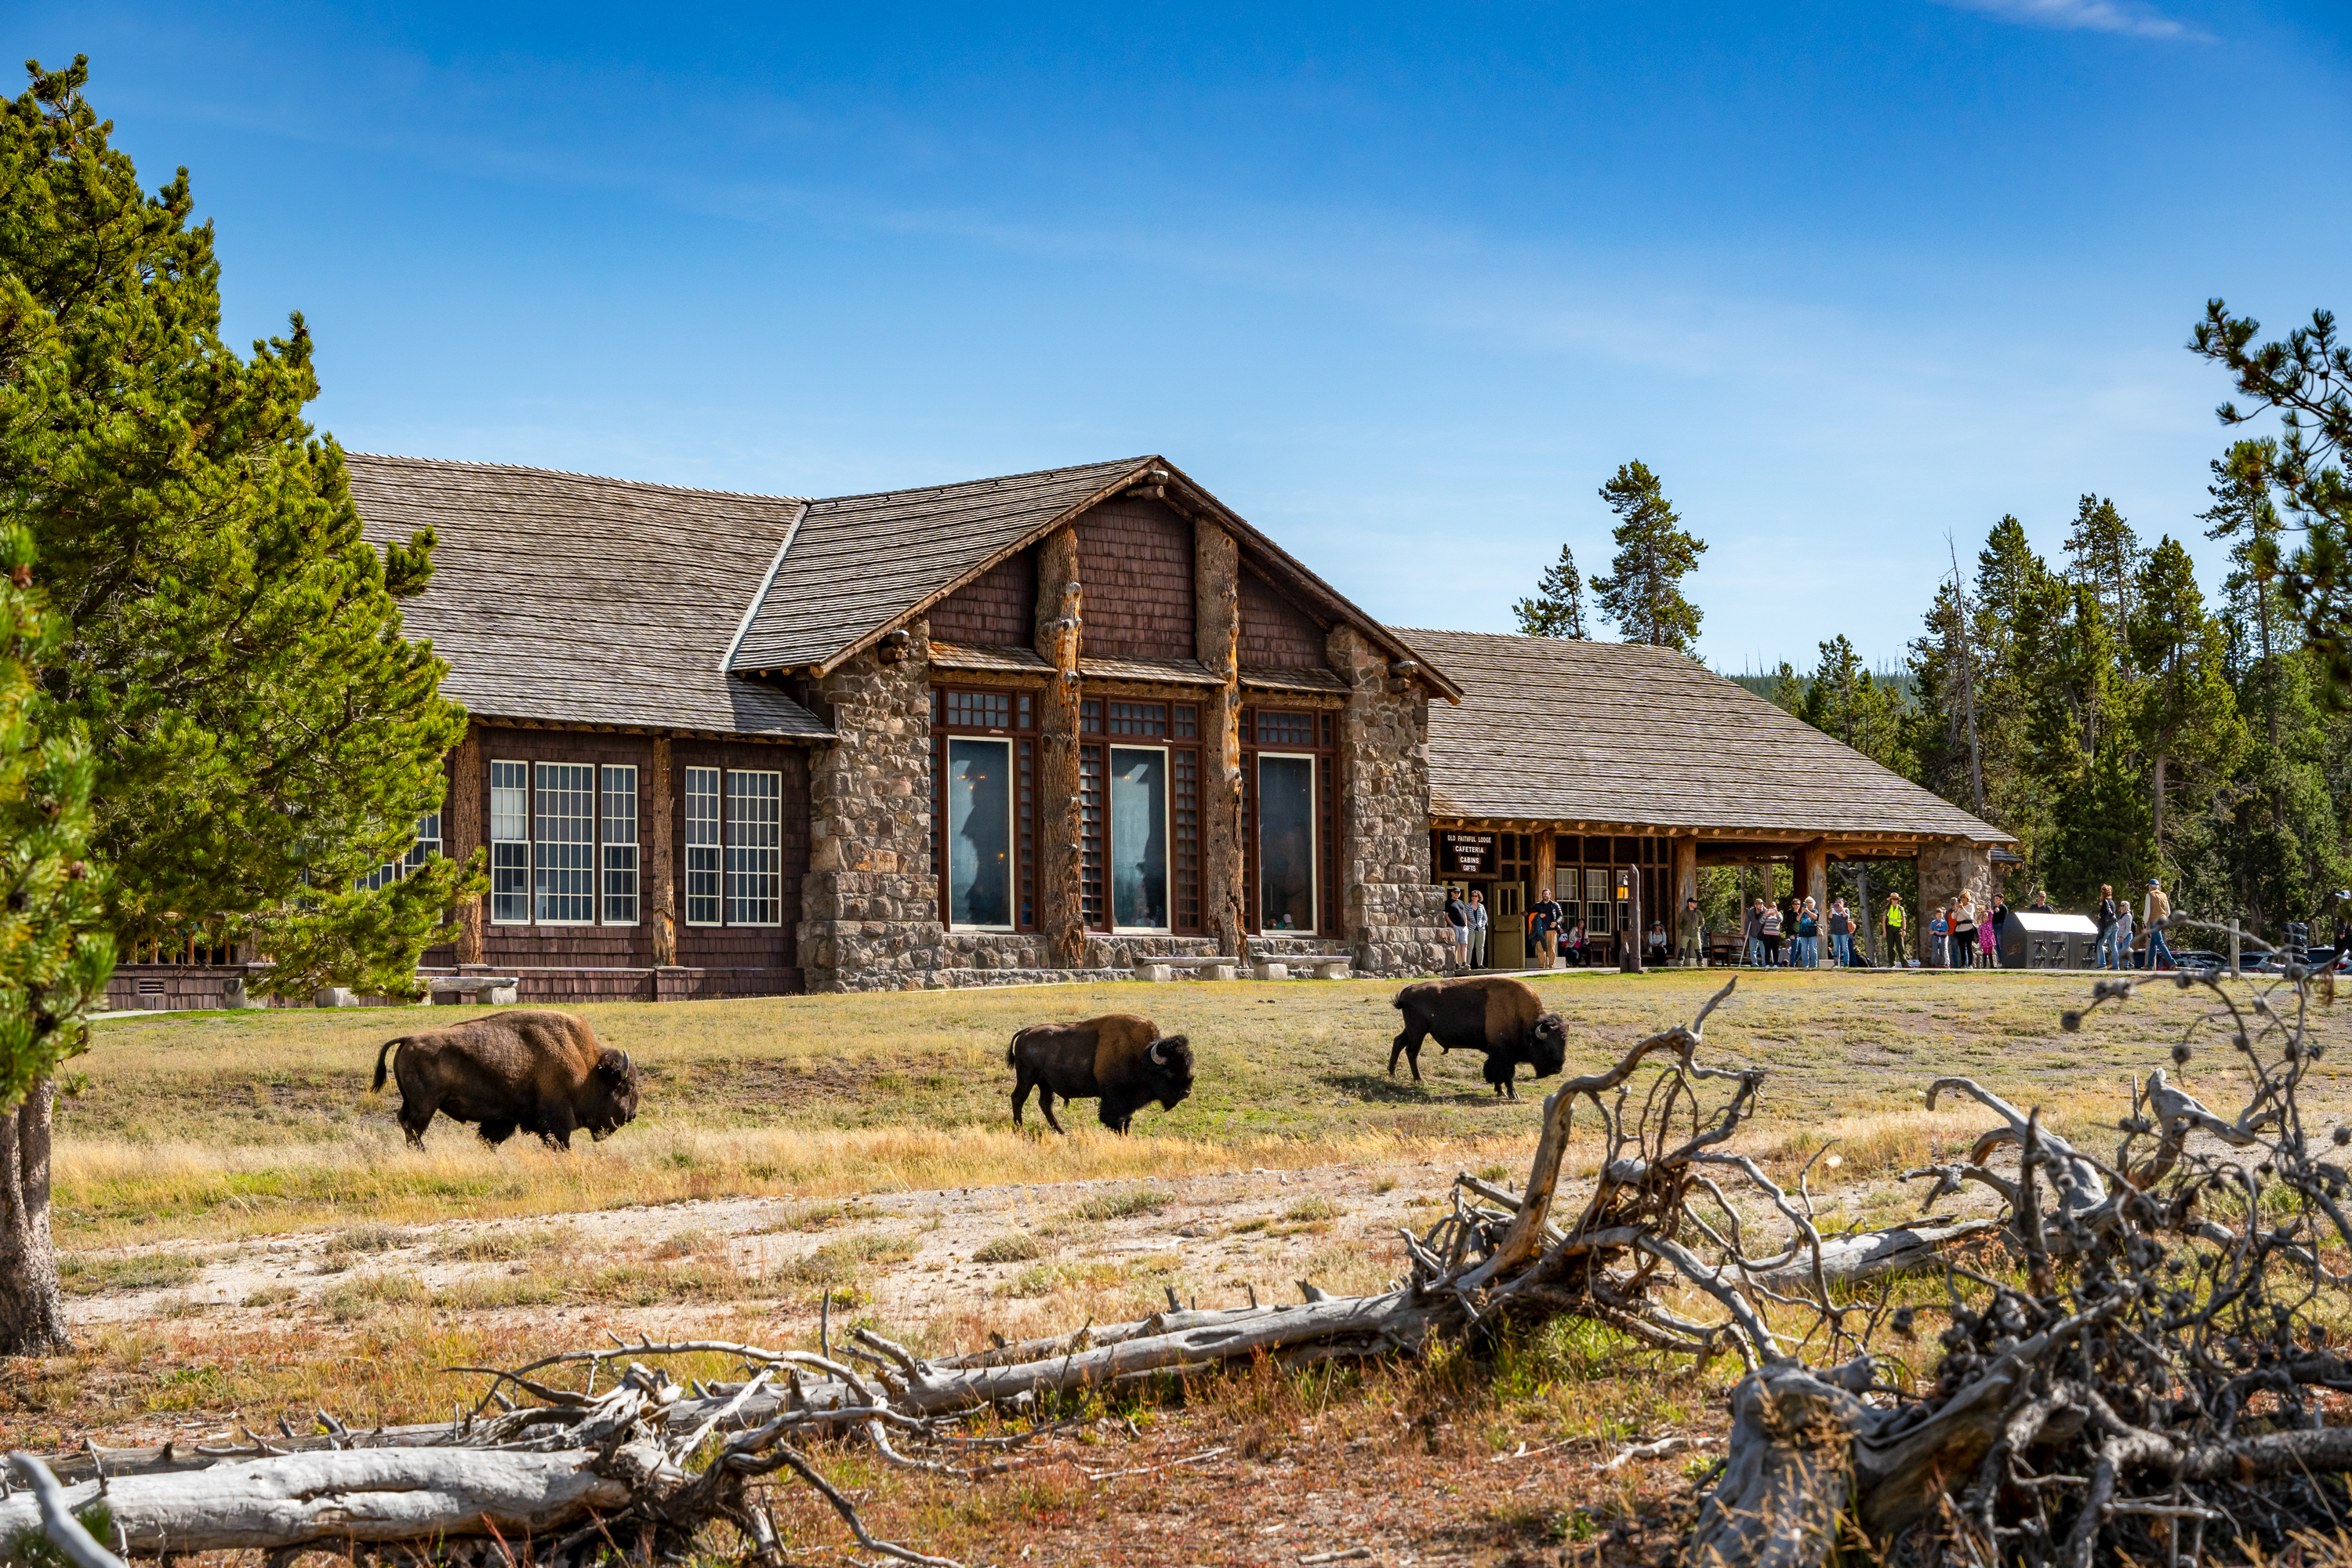 Three bison grazing in front of the Old Faithful Lodge